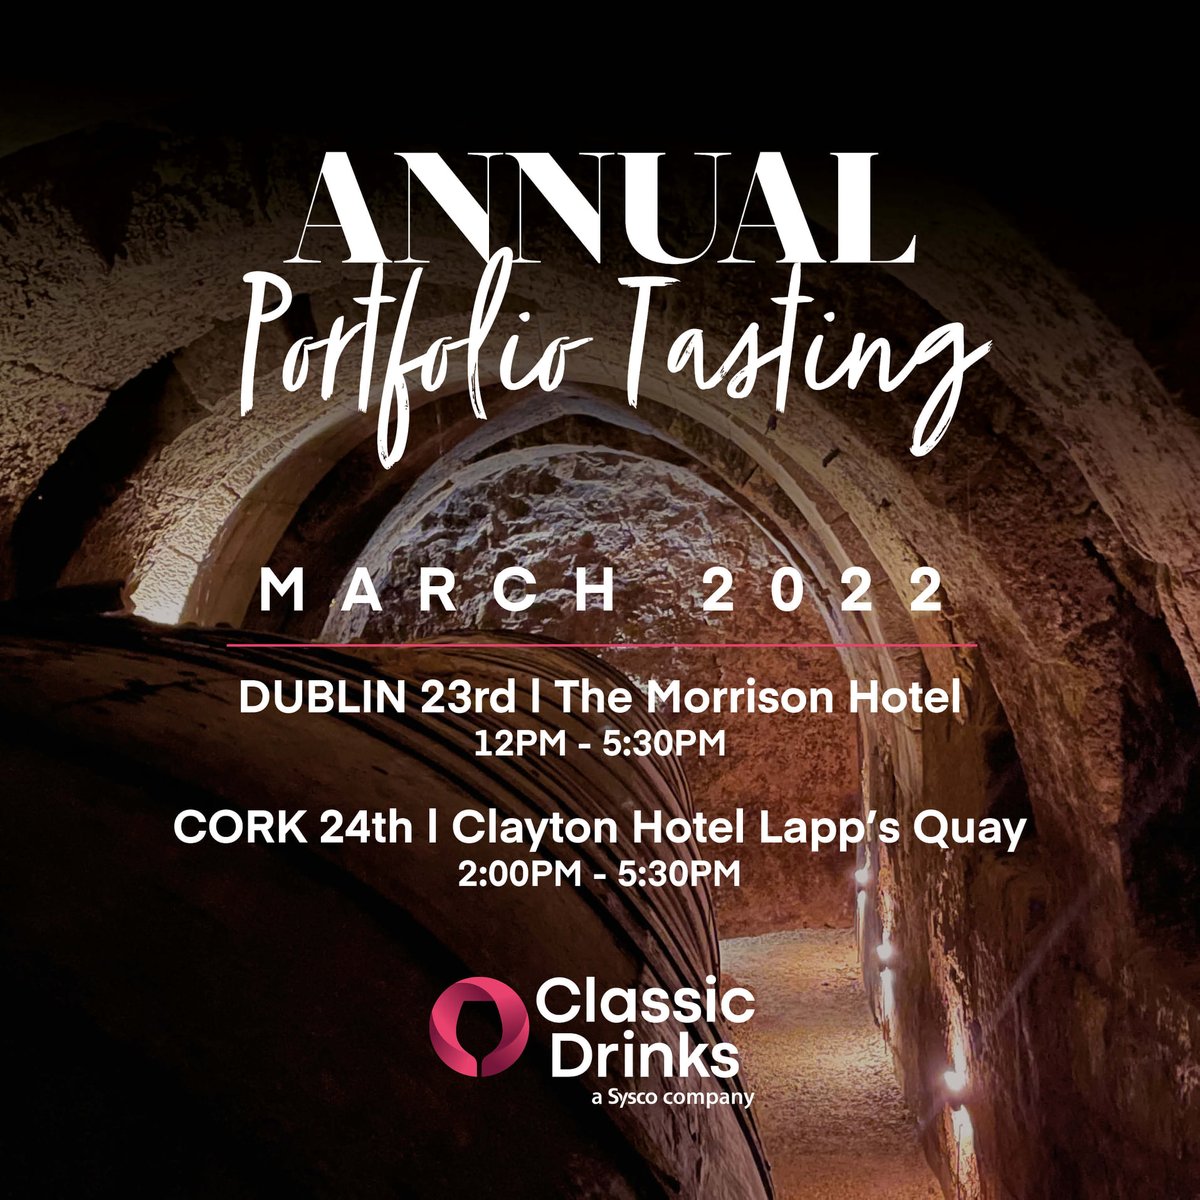 🥂 We couldn't be more excited for our friends at @classic_drinks who are hosting their Annual Portfolio Tasting event in Dublin and Cork. 🍷 To get a taste of their offerings, #register and confirm your #attendance today. #winetasting hubs.li/Q016n3mY0